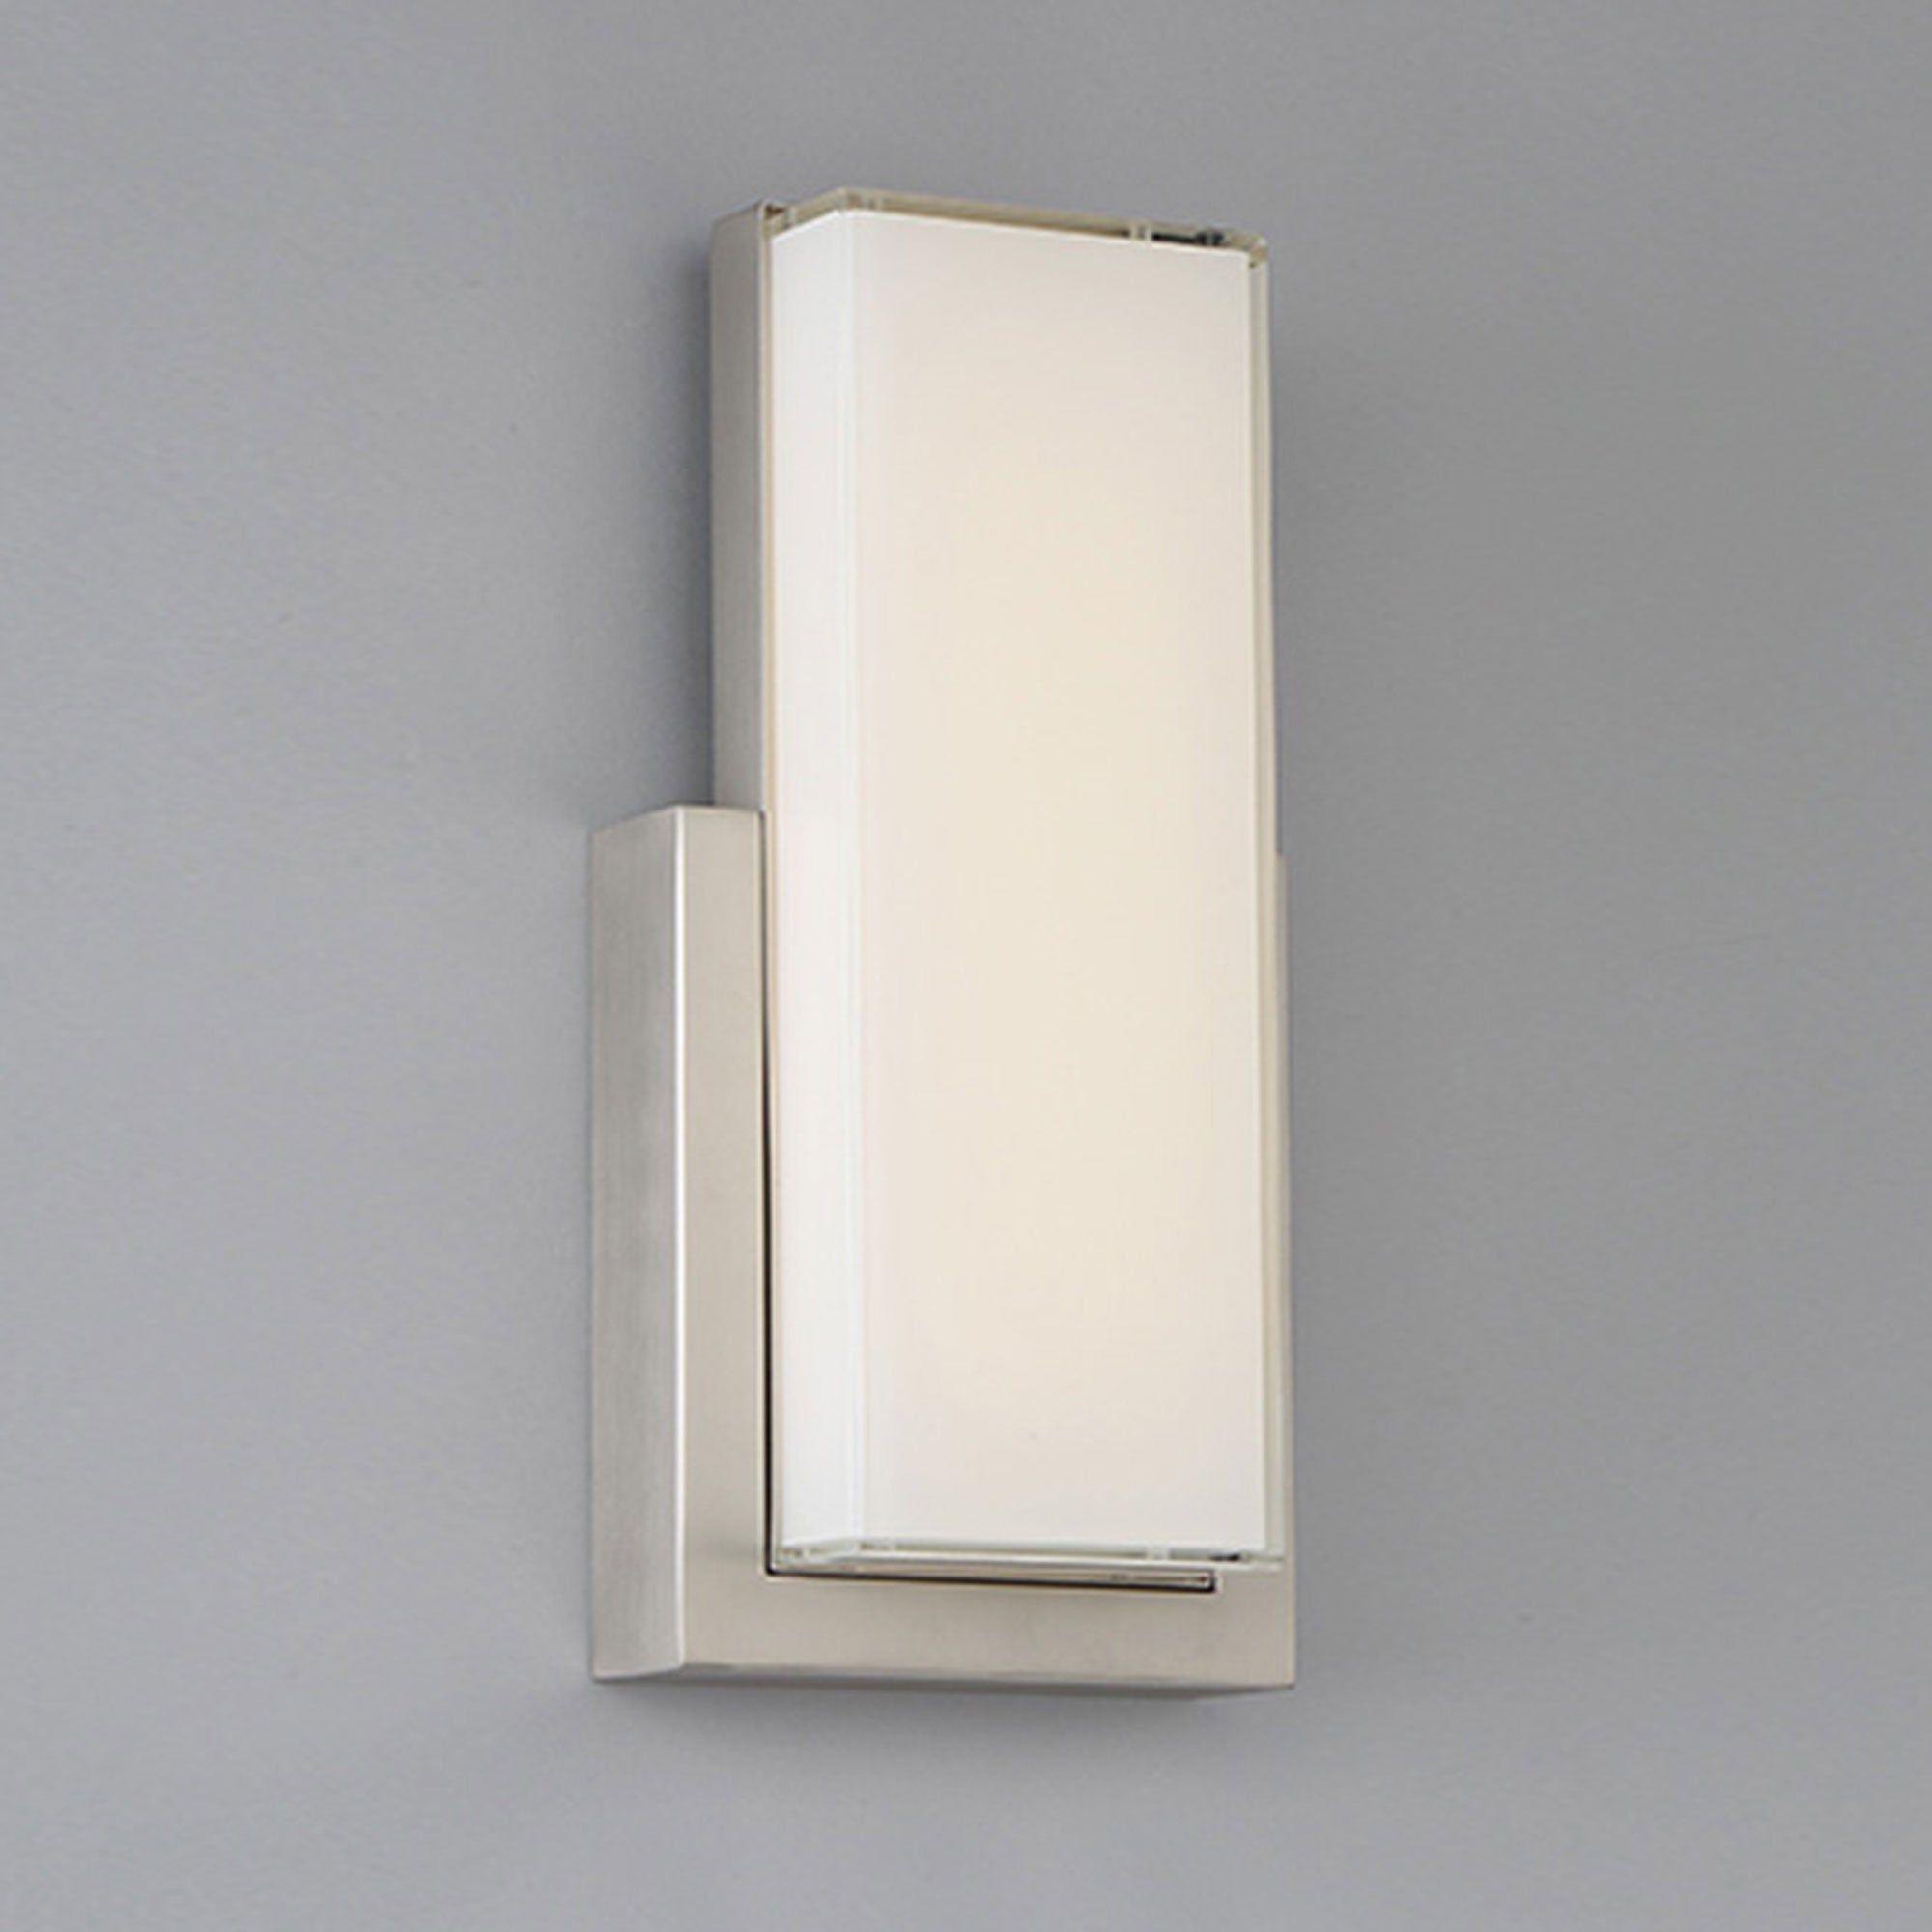 dweLED - Corbusier 15" LED Wall Sconce - Lights Canada